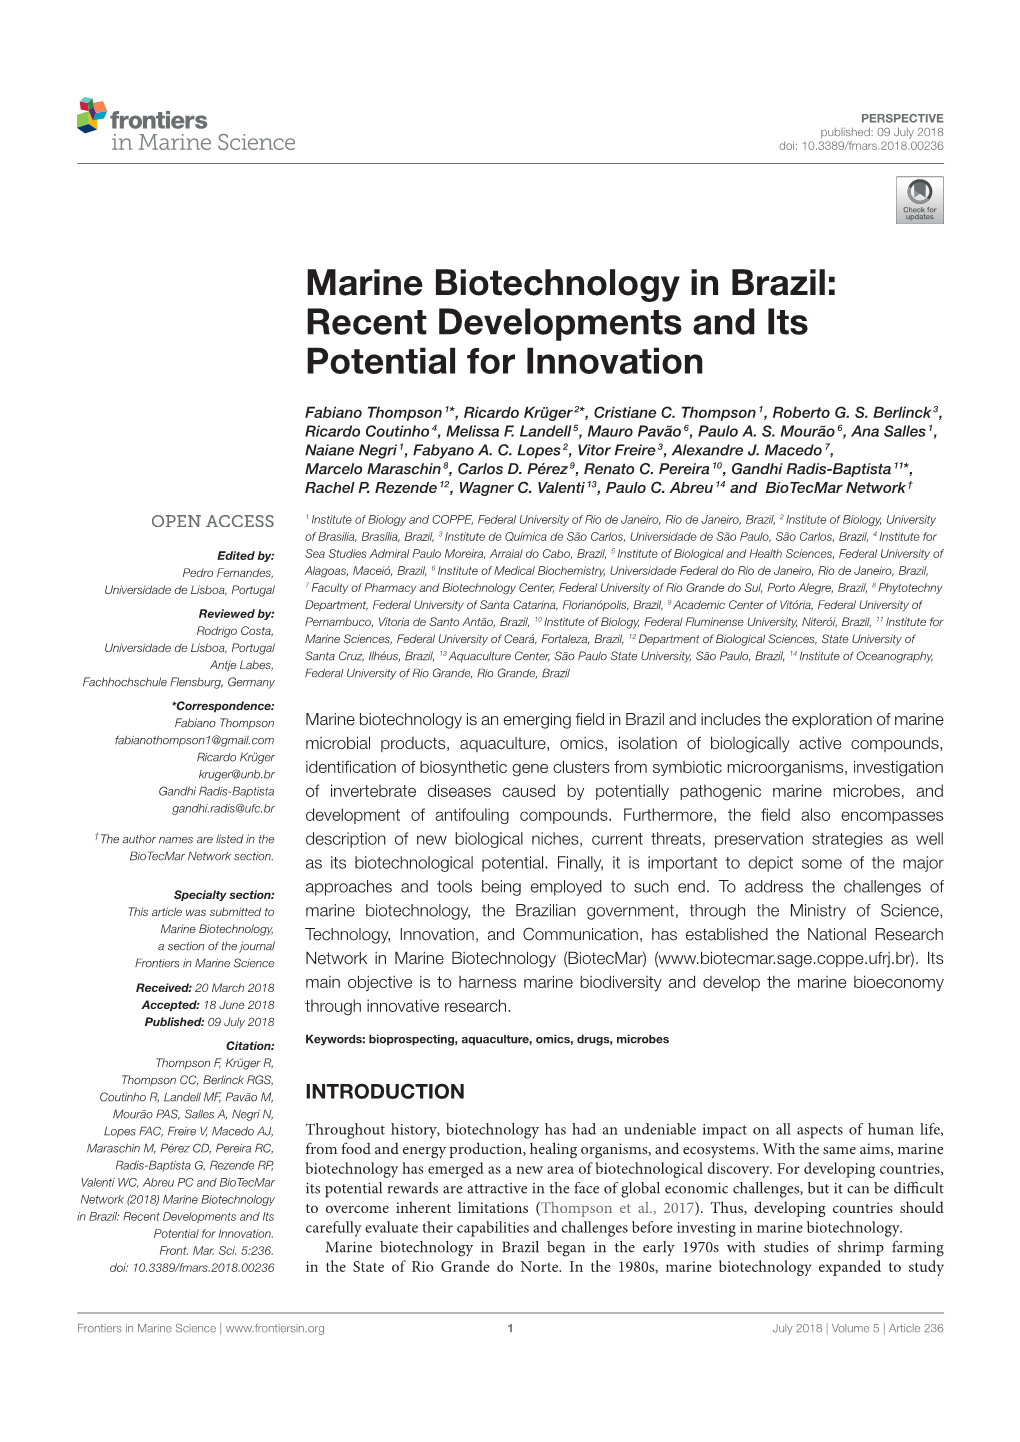 Marine Biotechnology in Brazil: Recent Developments and Its Potential for Innovation